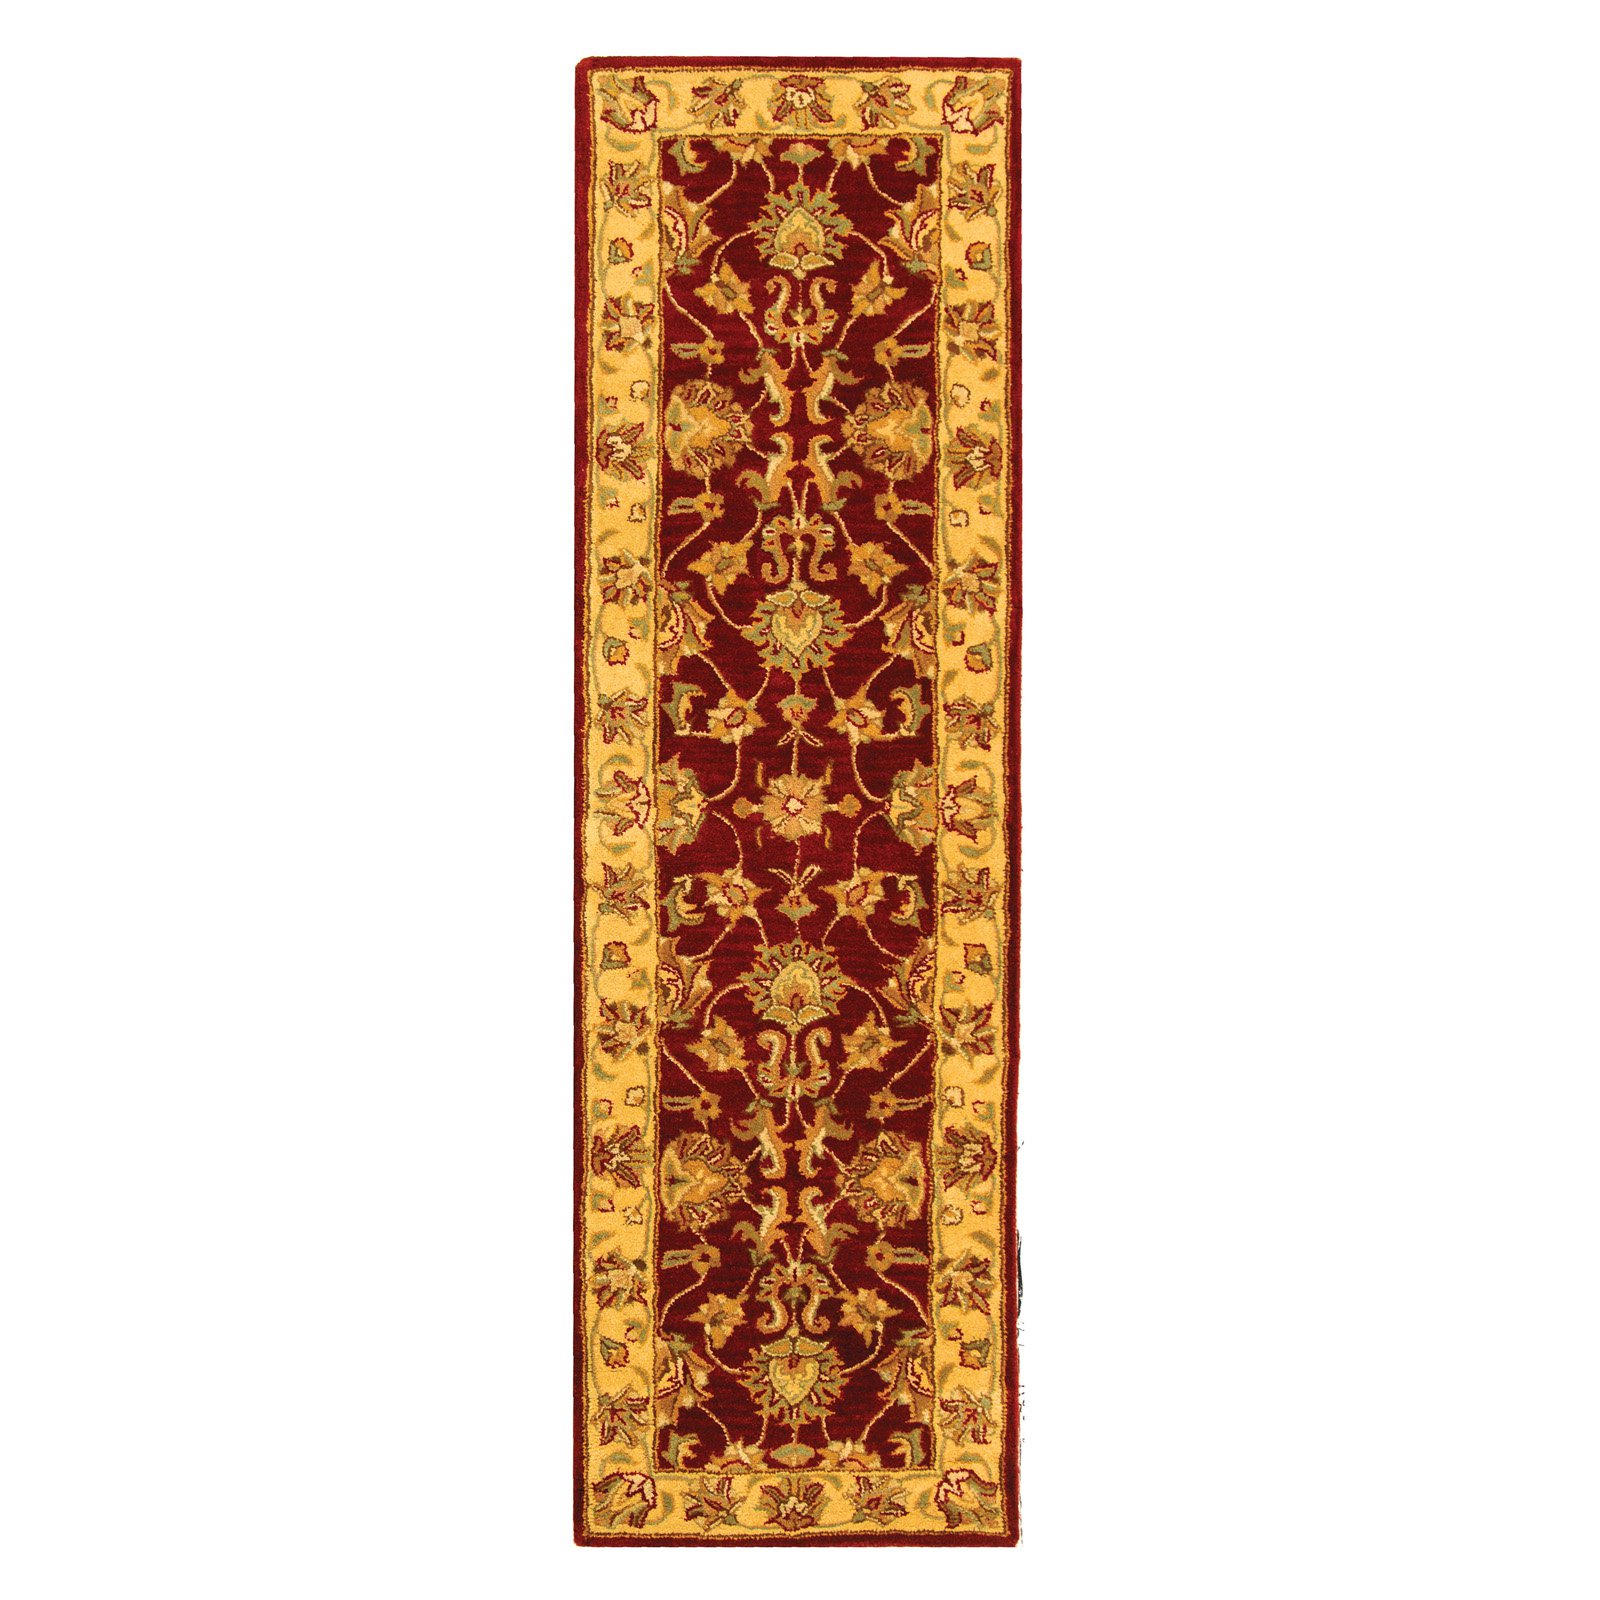 SAFAVIEH Heritage Regis Traditional Wool Area Rug, Red/Gold, 6' x 6' Round - image 3 of 9